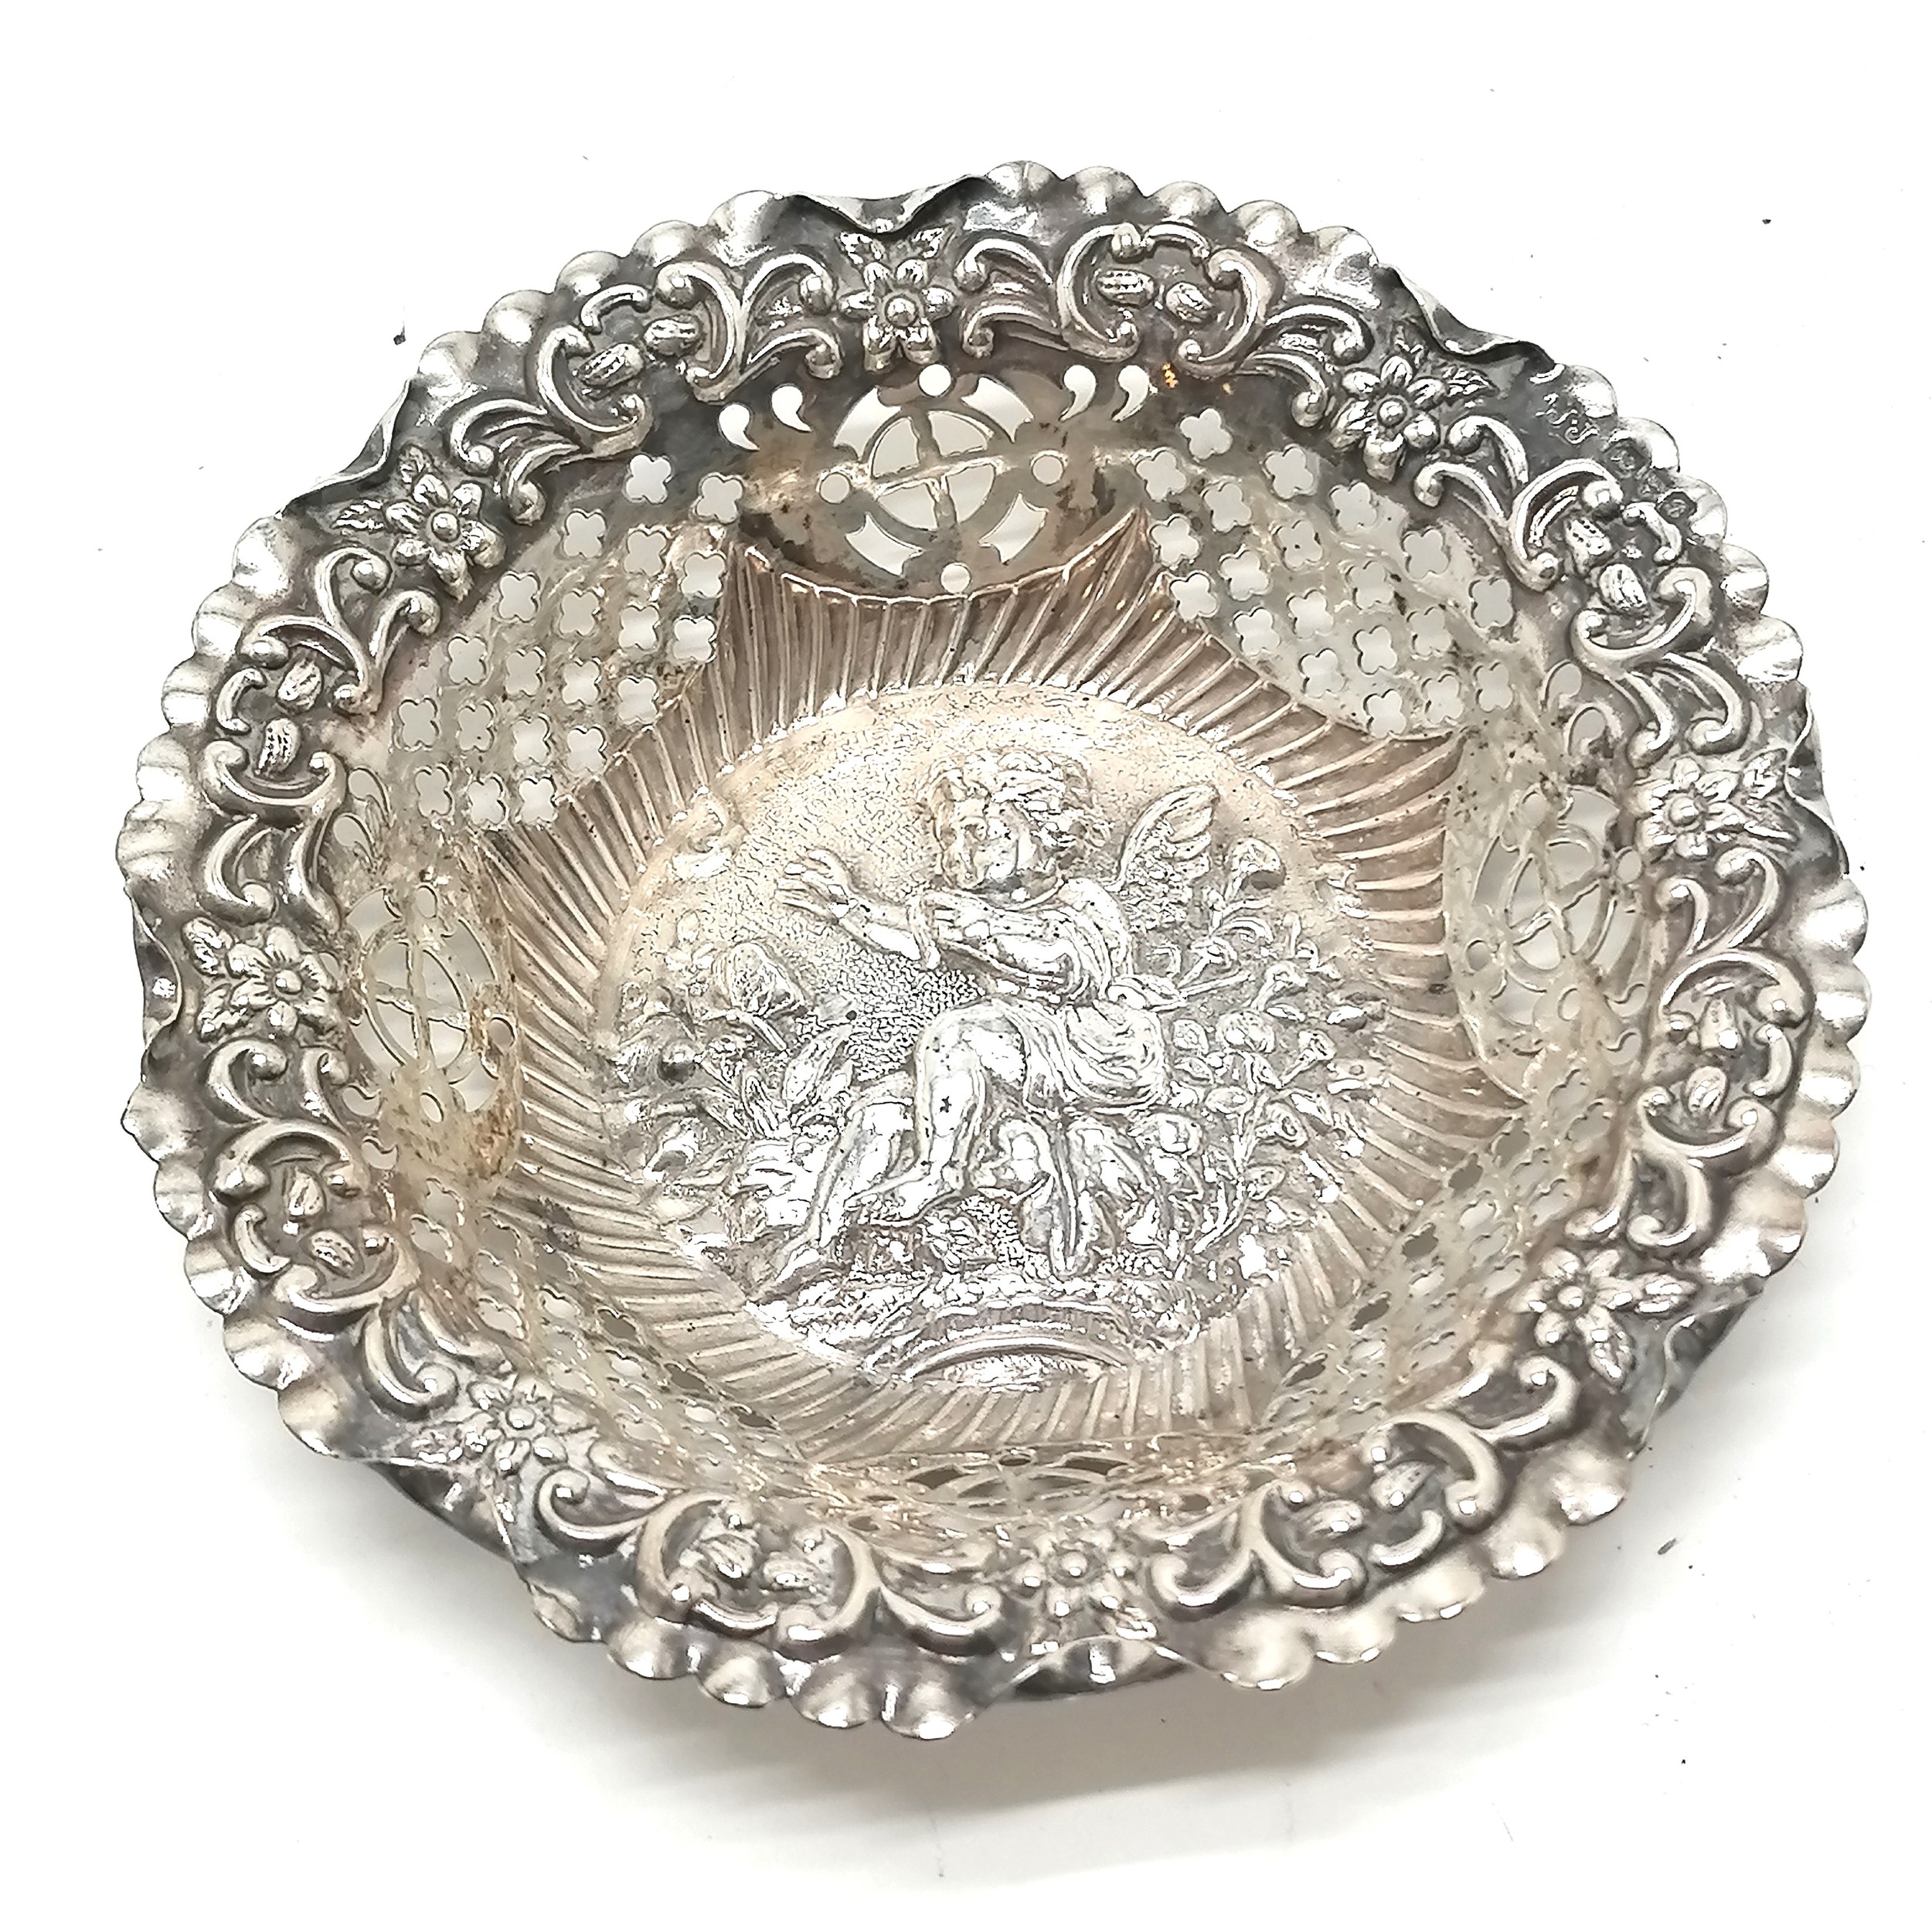 1902 Chester silver pierced bonbon dish with cherub detail by Jay, Richard Attenborough & Co - - Image 3 of 3